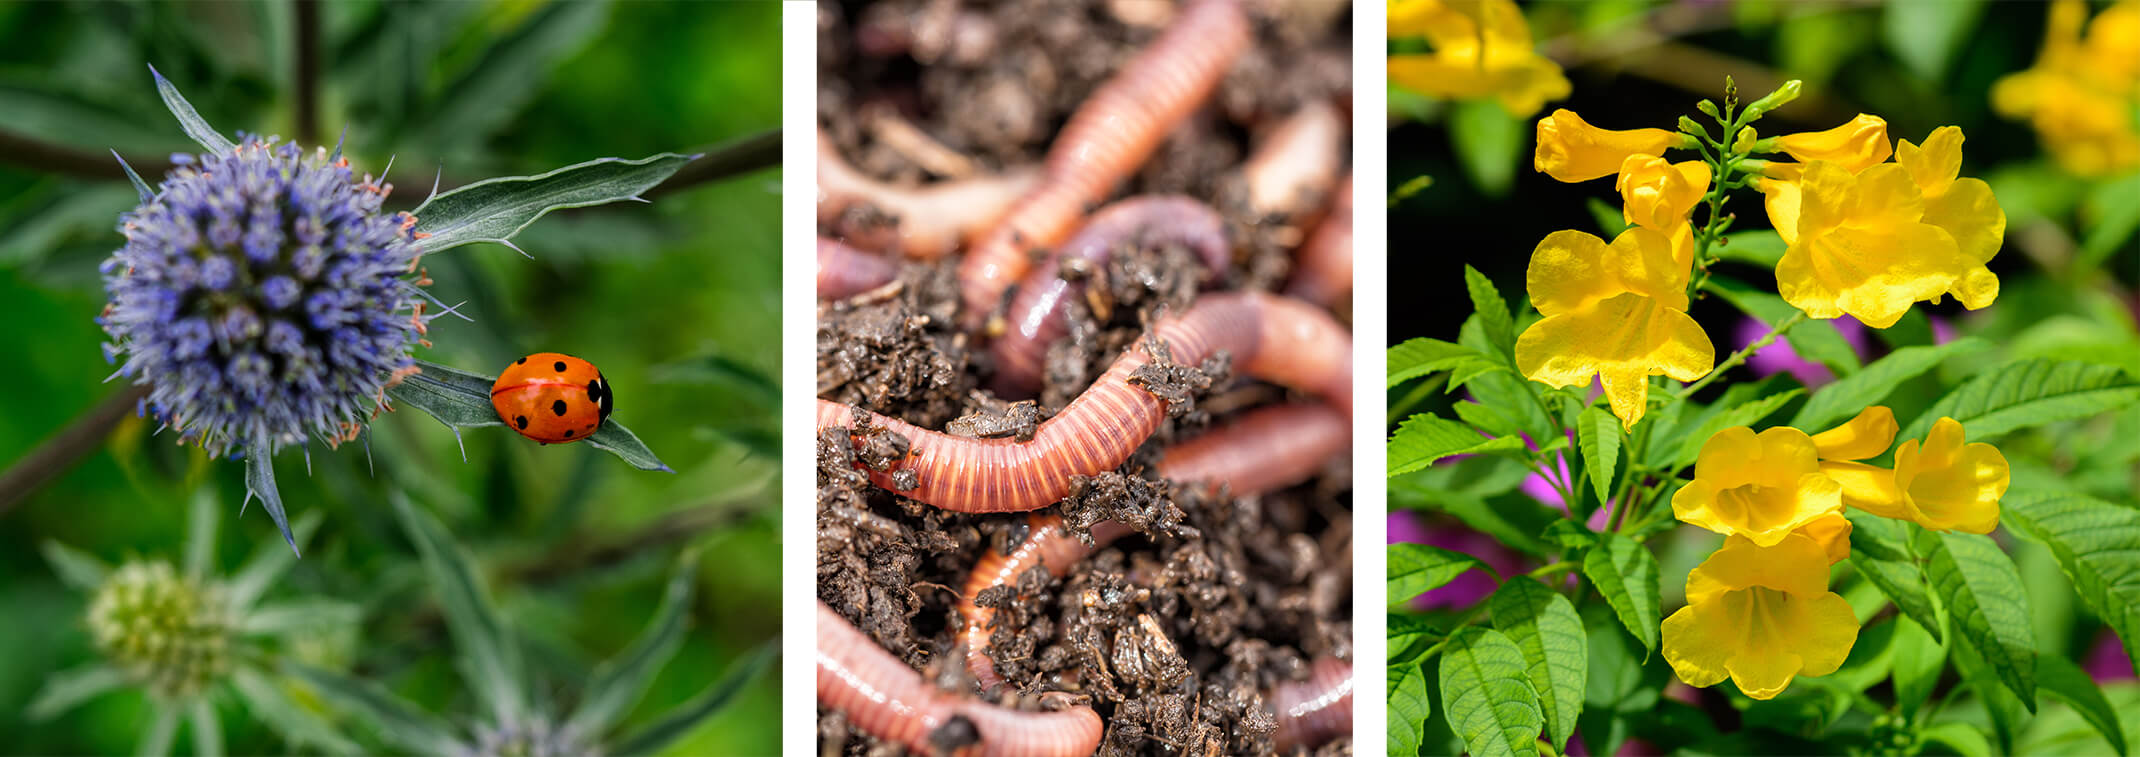 3 images: A ladybug on a thistle; worms in soil; and a yellow tecoma sans plant